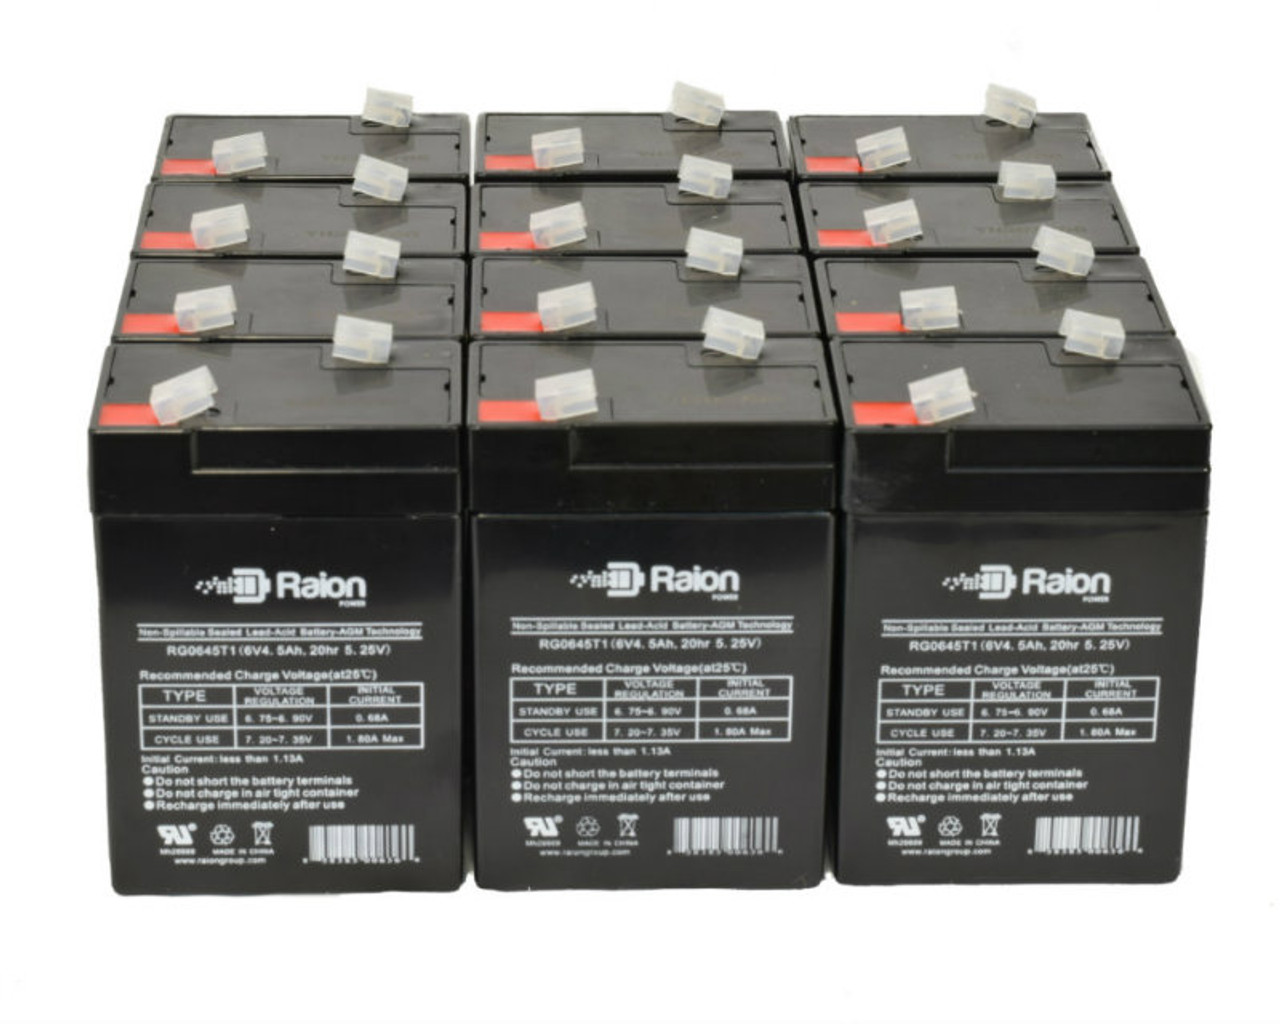 Raion Power 6V 4.5Ah Replacement Emergency Light Battery for Sure-Lites 3901 - 12 Pack